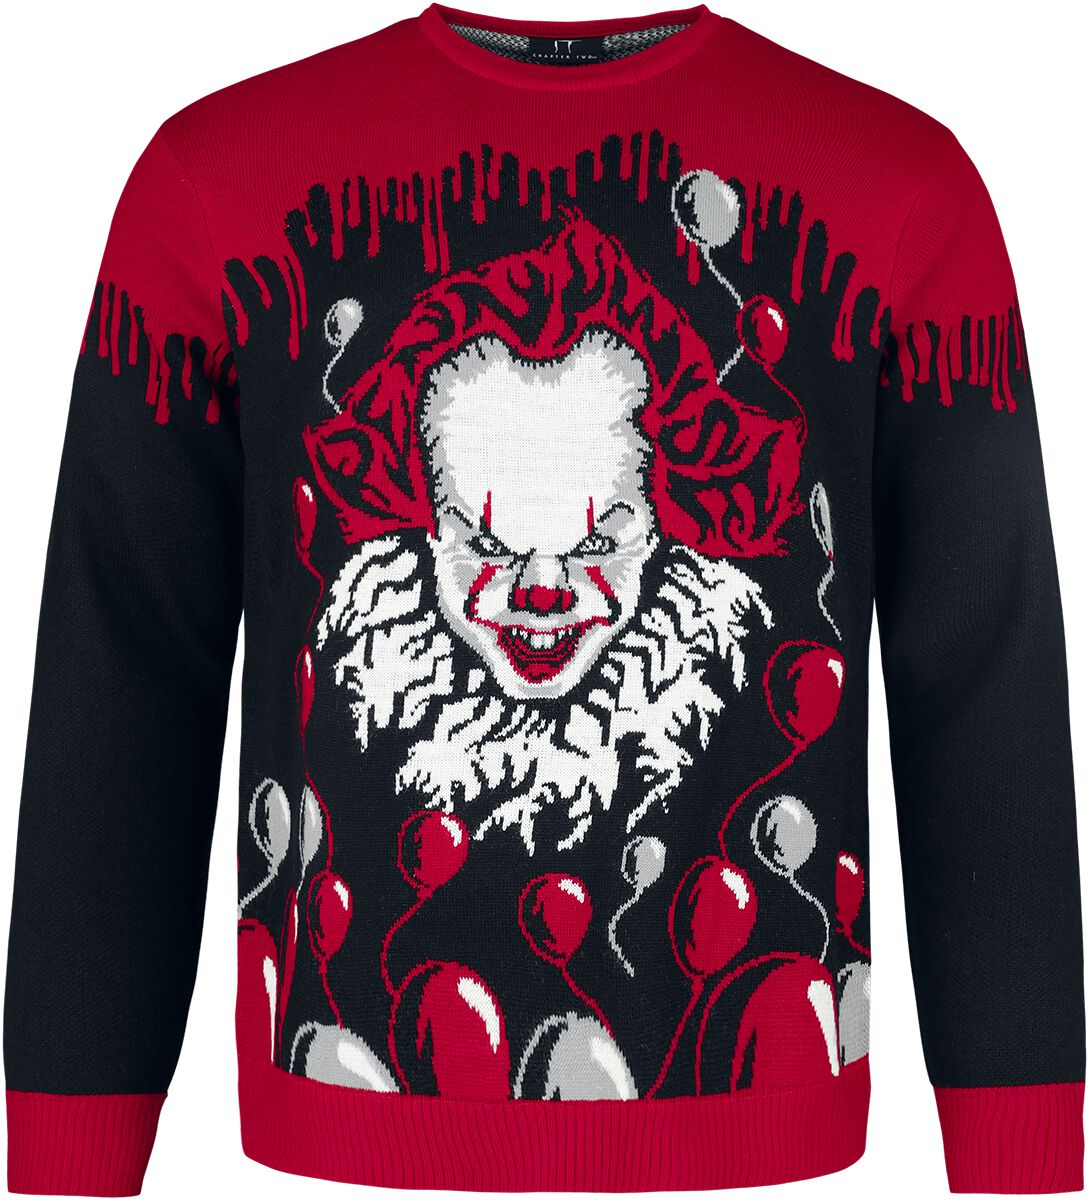 IT Chapter 2 Pennywise Strickpullover multicolor in M